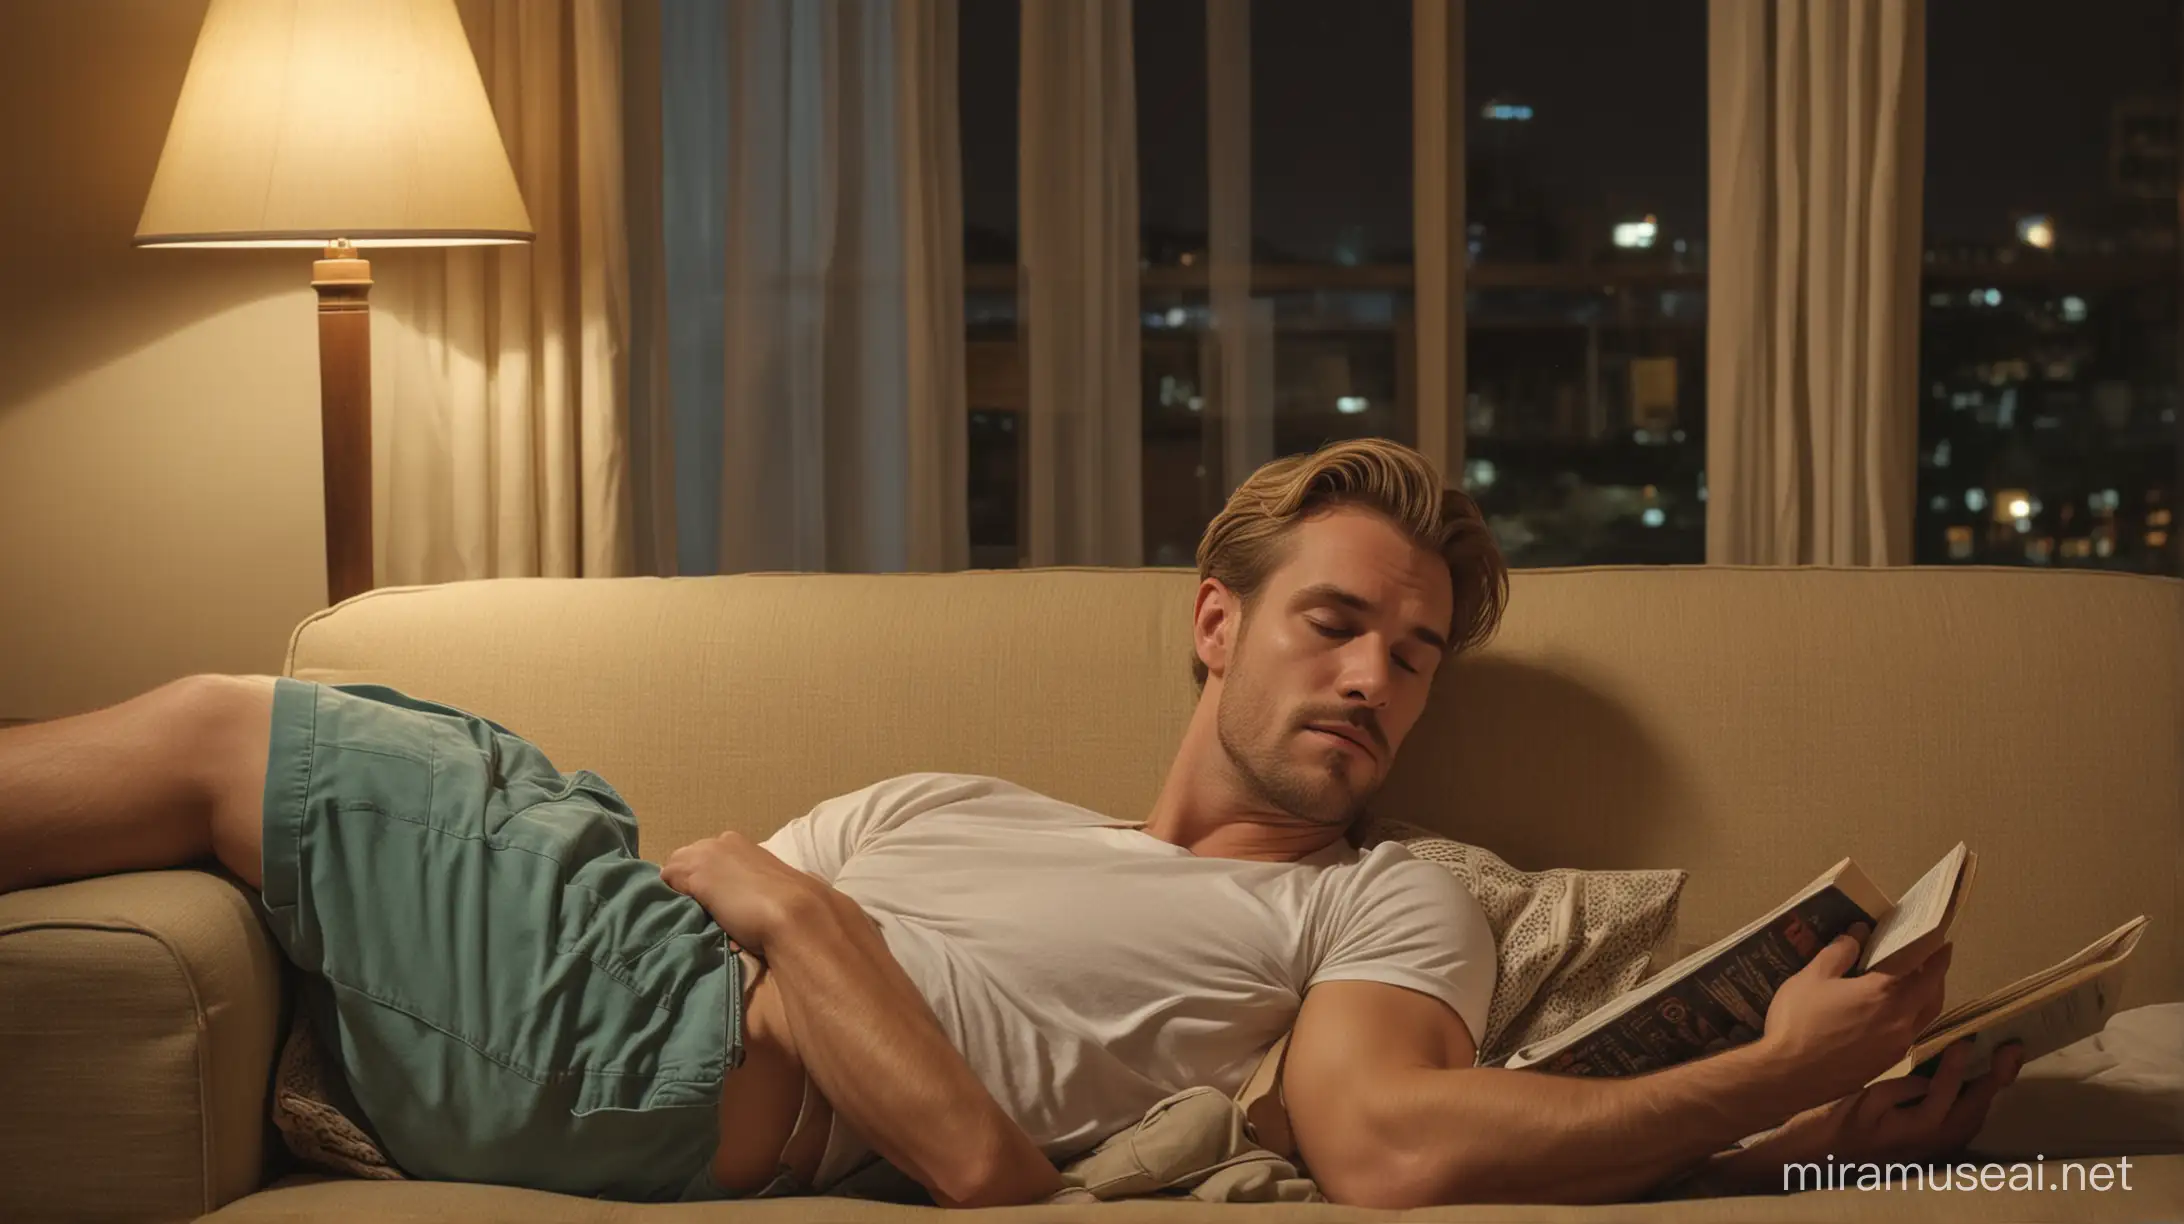 wide shot, dimmly lit mid century living room, blond rugged looking muscly handsome man wearing tshirt and shorts, asleep on retro sofa, with pulp novel book open and resting on his chest, large window in background, relaxing, nighttime